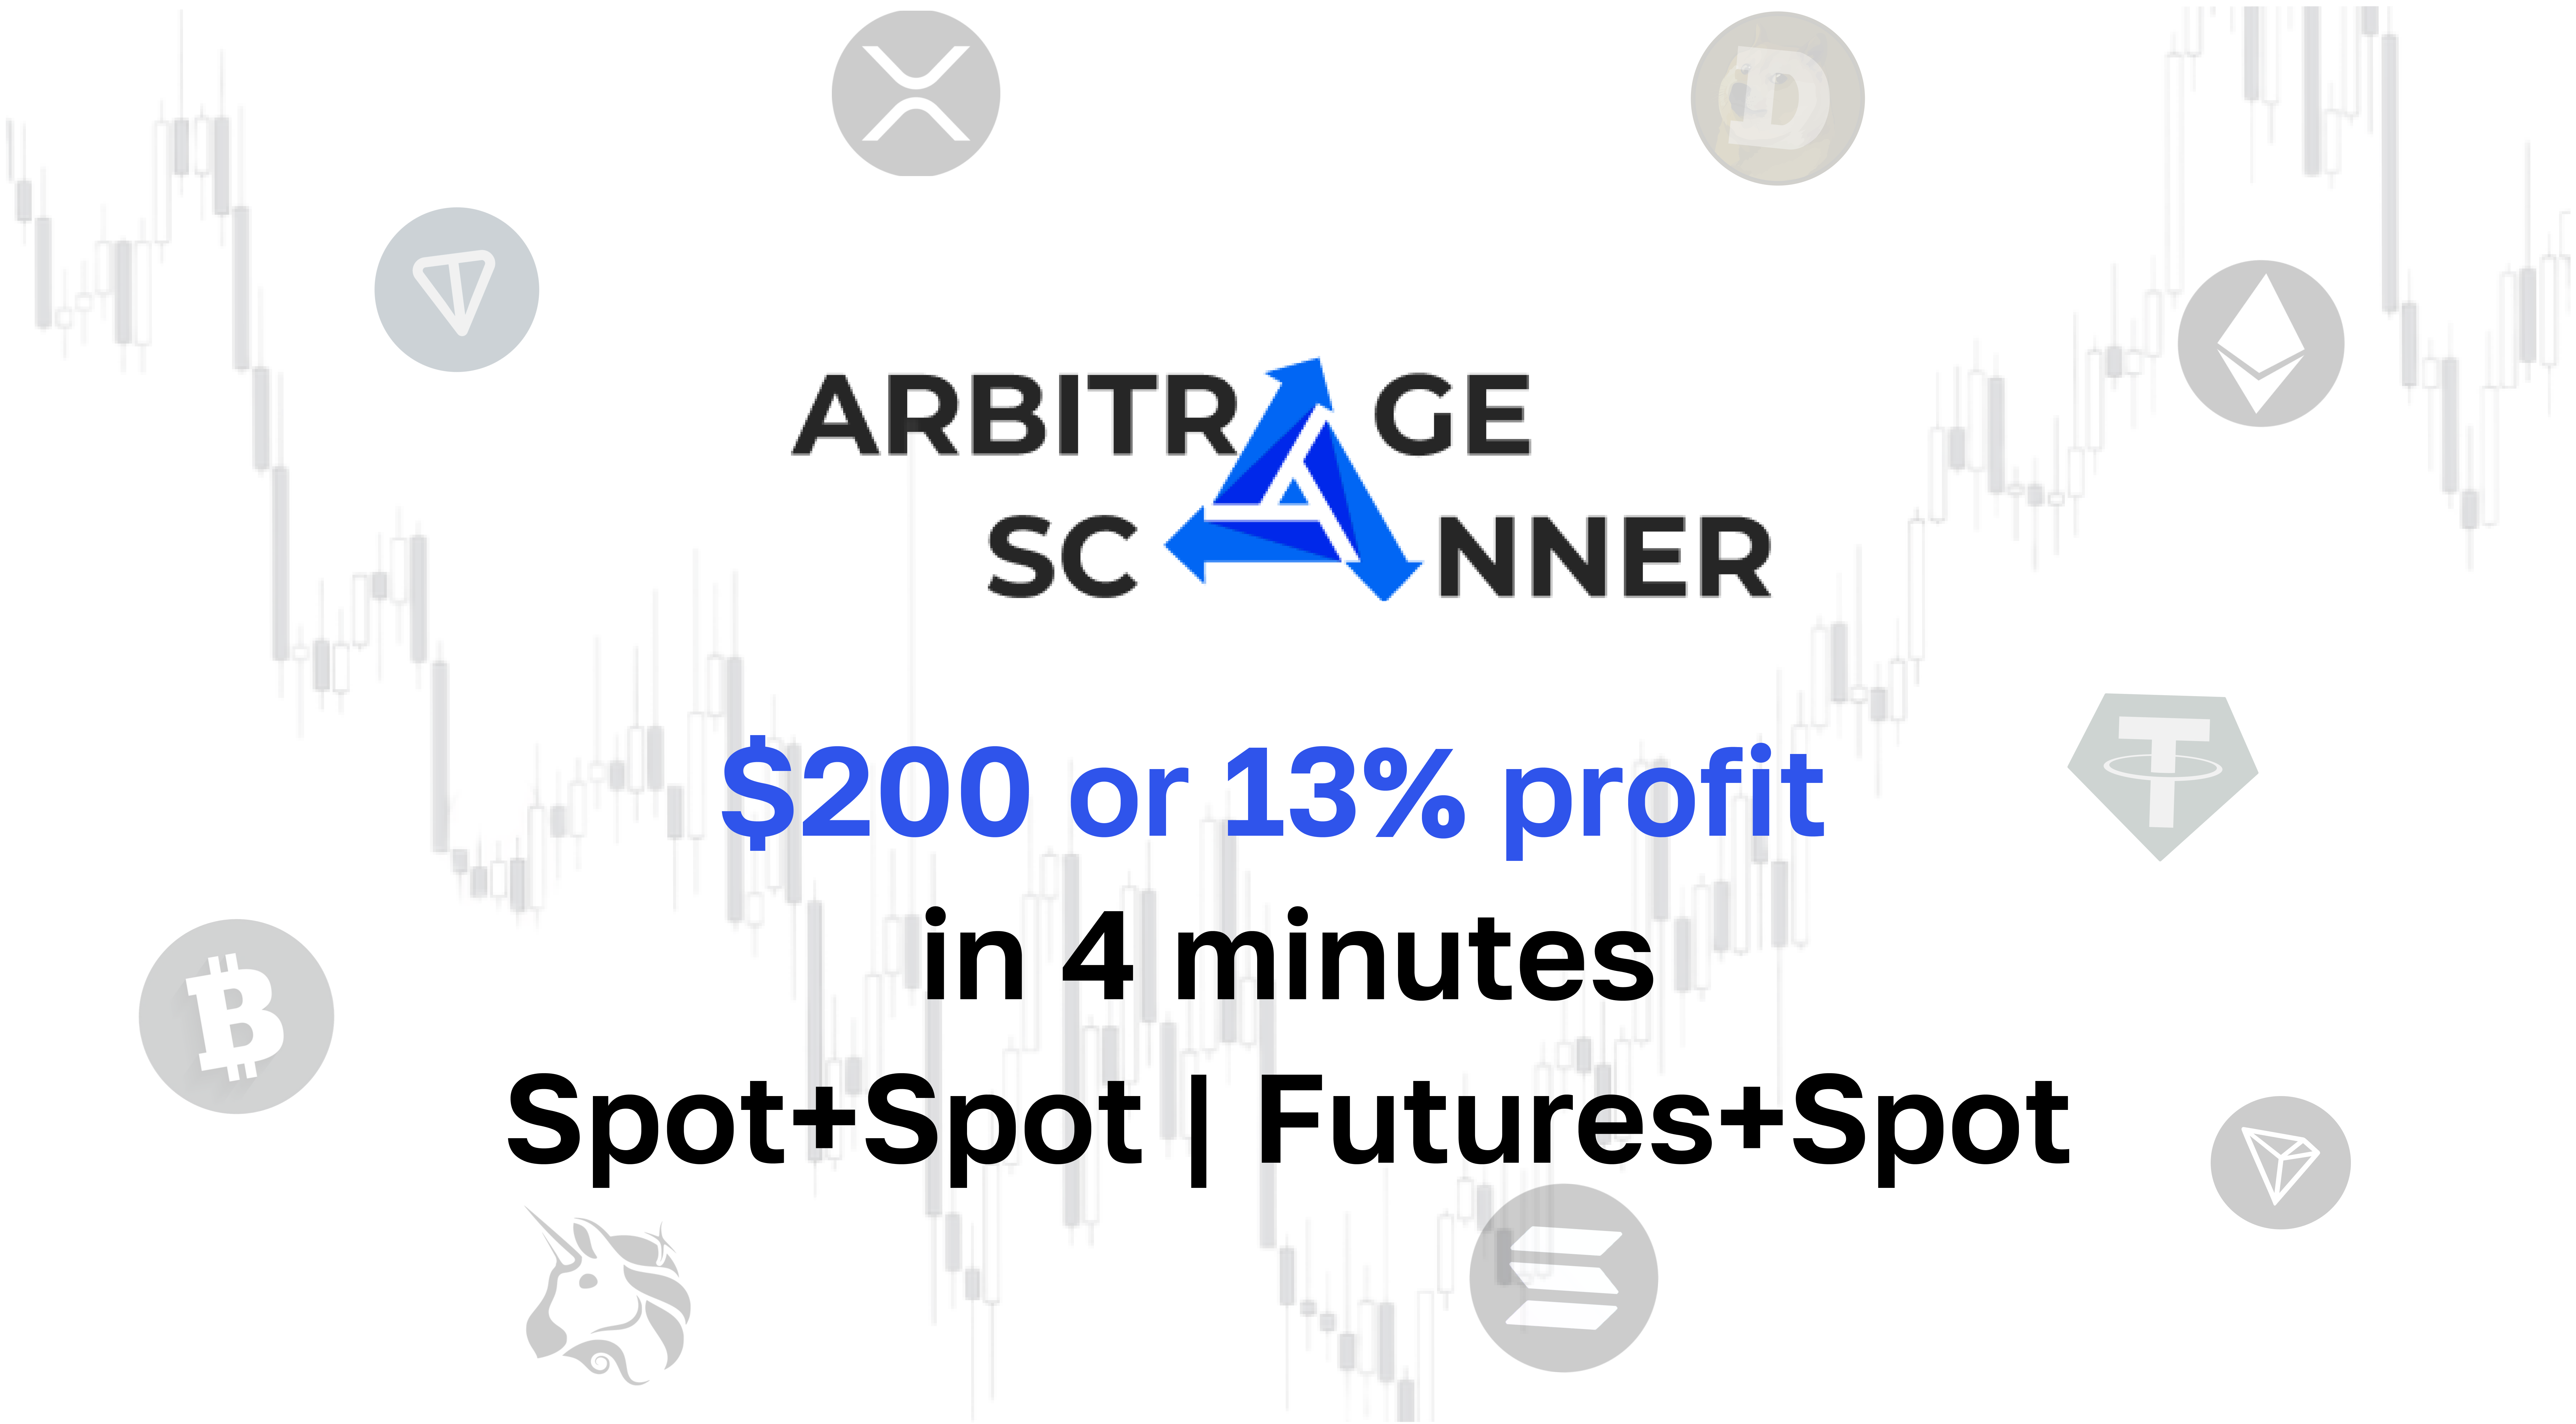 Cryptocurrency Arbitrage | spot+spot/futures+spot - $200 or 13% profit in 4 minutes! | Case #61